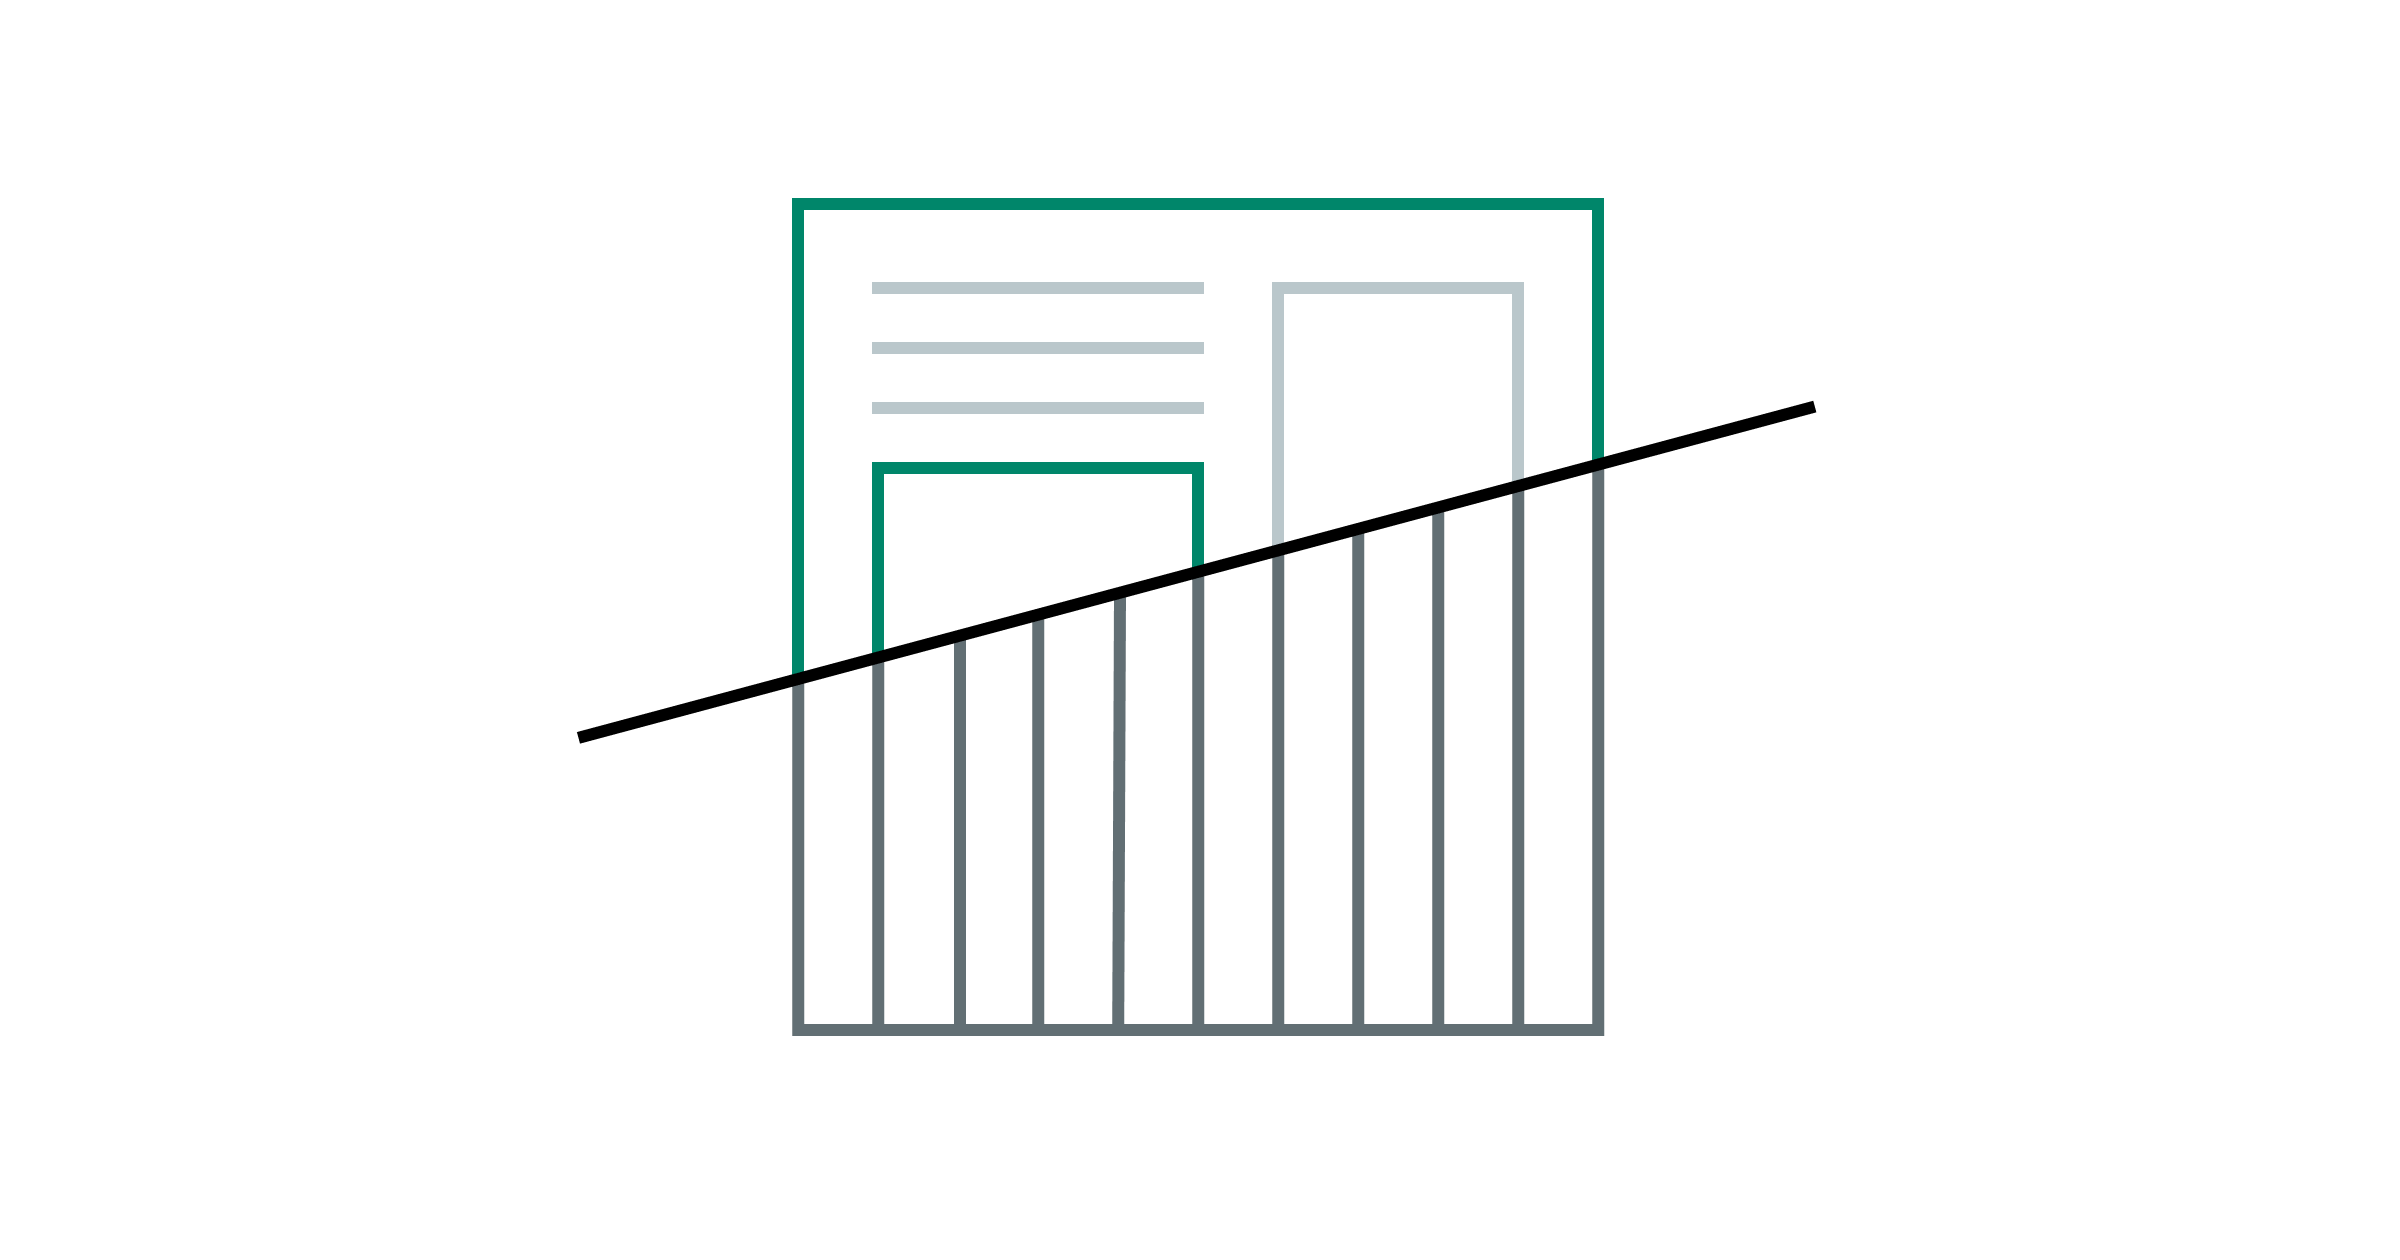 A newsletter/newspaper style outline minimal icon, cut in half by a vertical bar chart